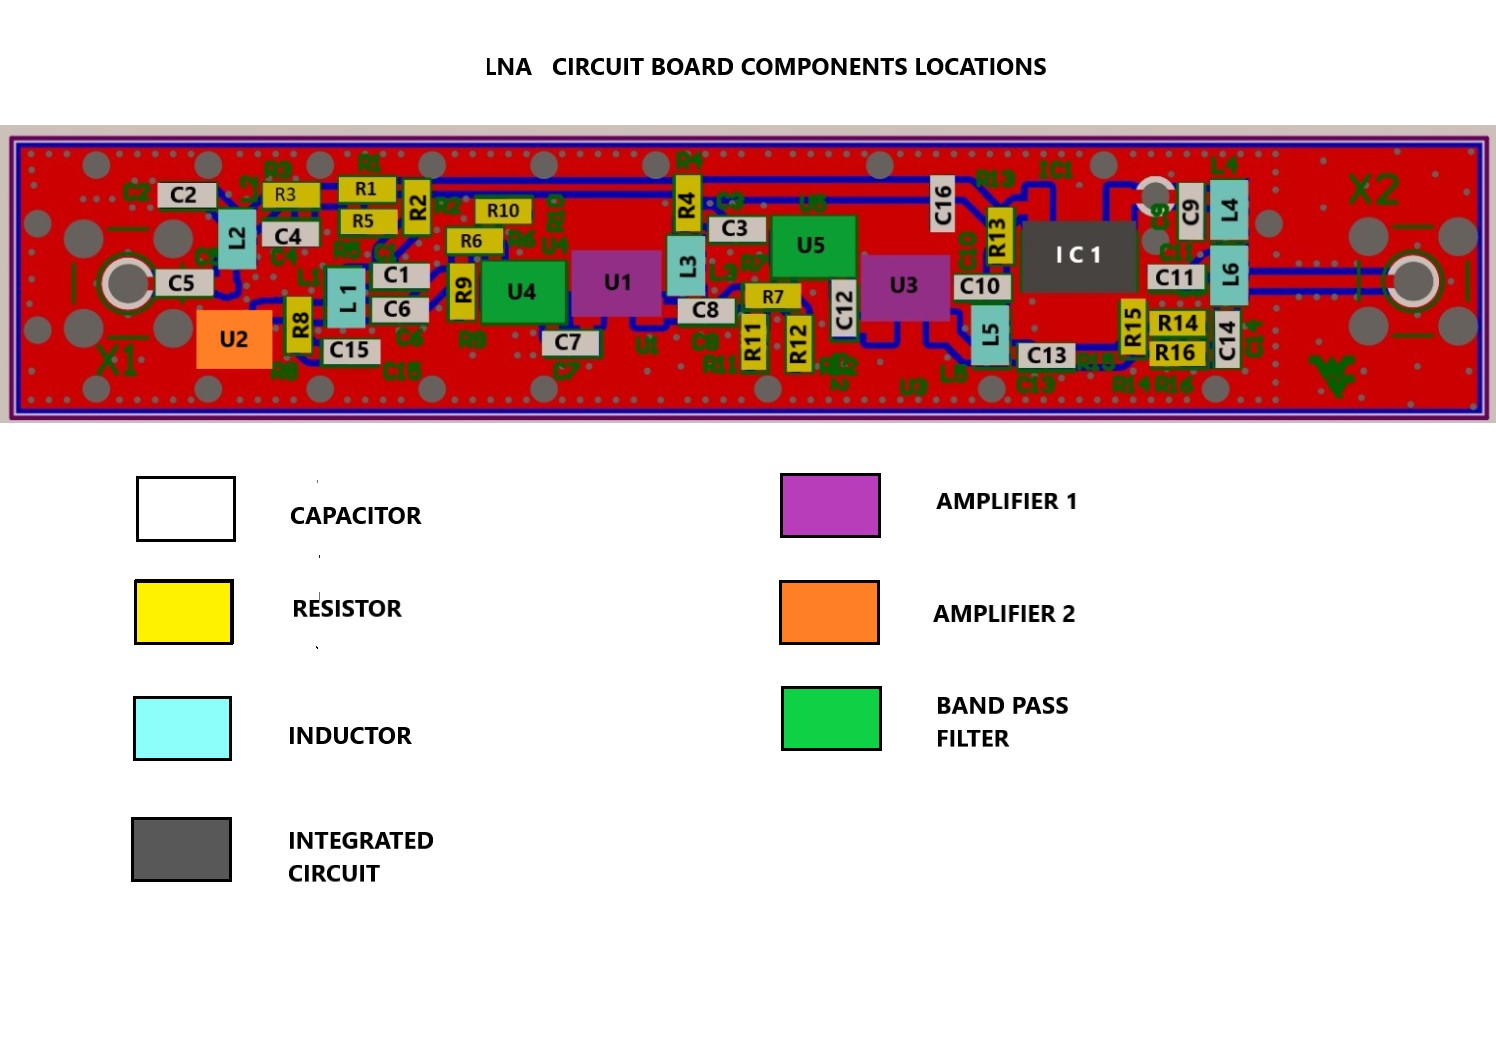 Image of the Component Locations on the Circuit Board